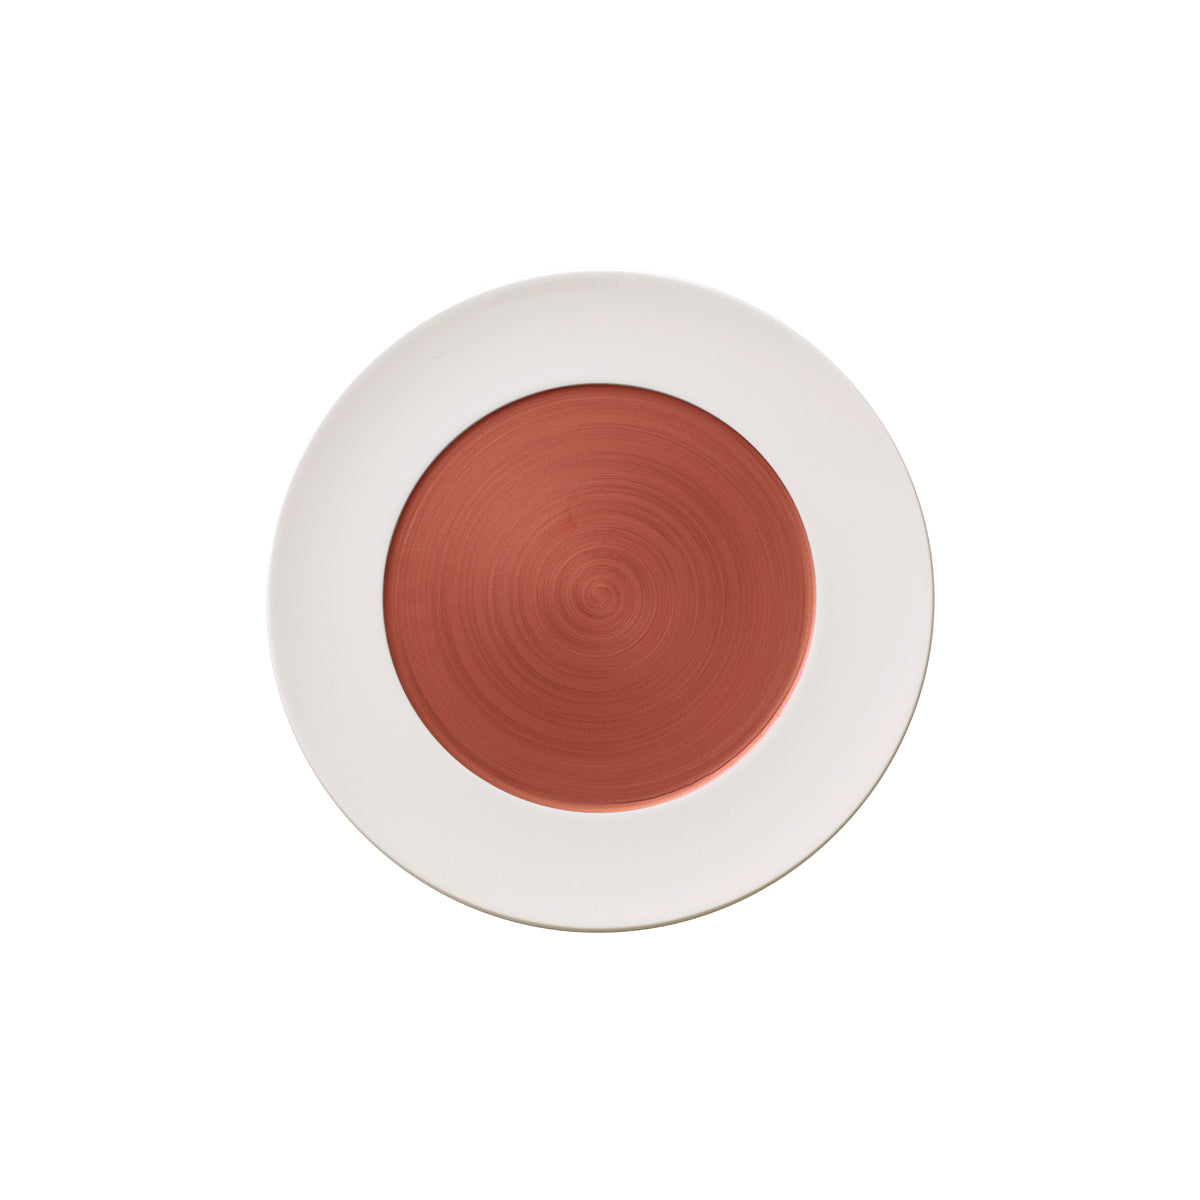 VB16-4070-2591 Villeroy And Boch Villeroy And Boch Copper Glow Plate Inside Wide Rim 320mm Tomkin Australia Hospitality Supplies